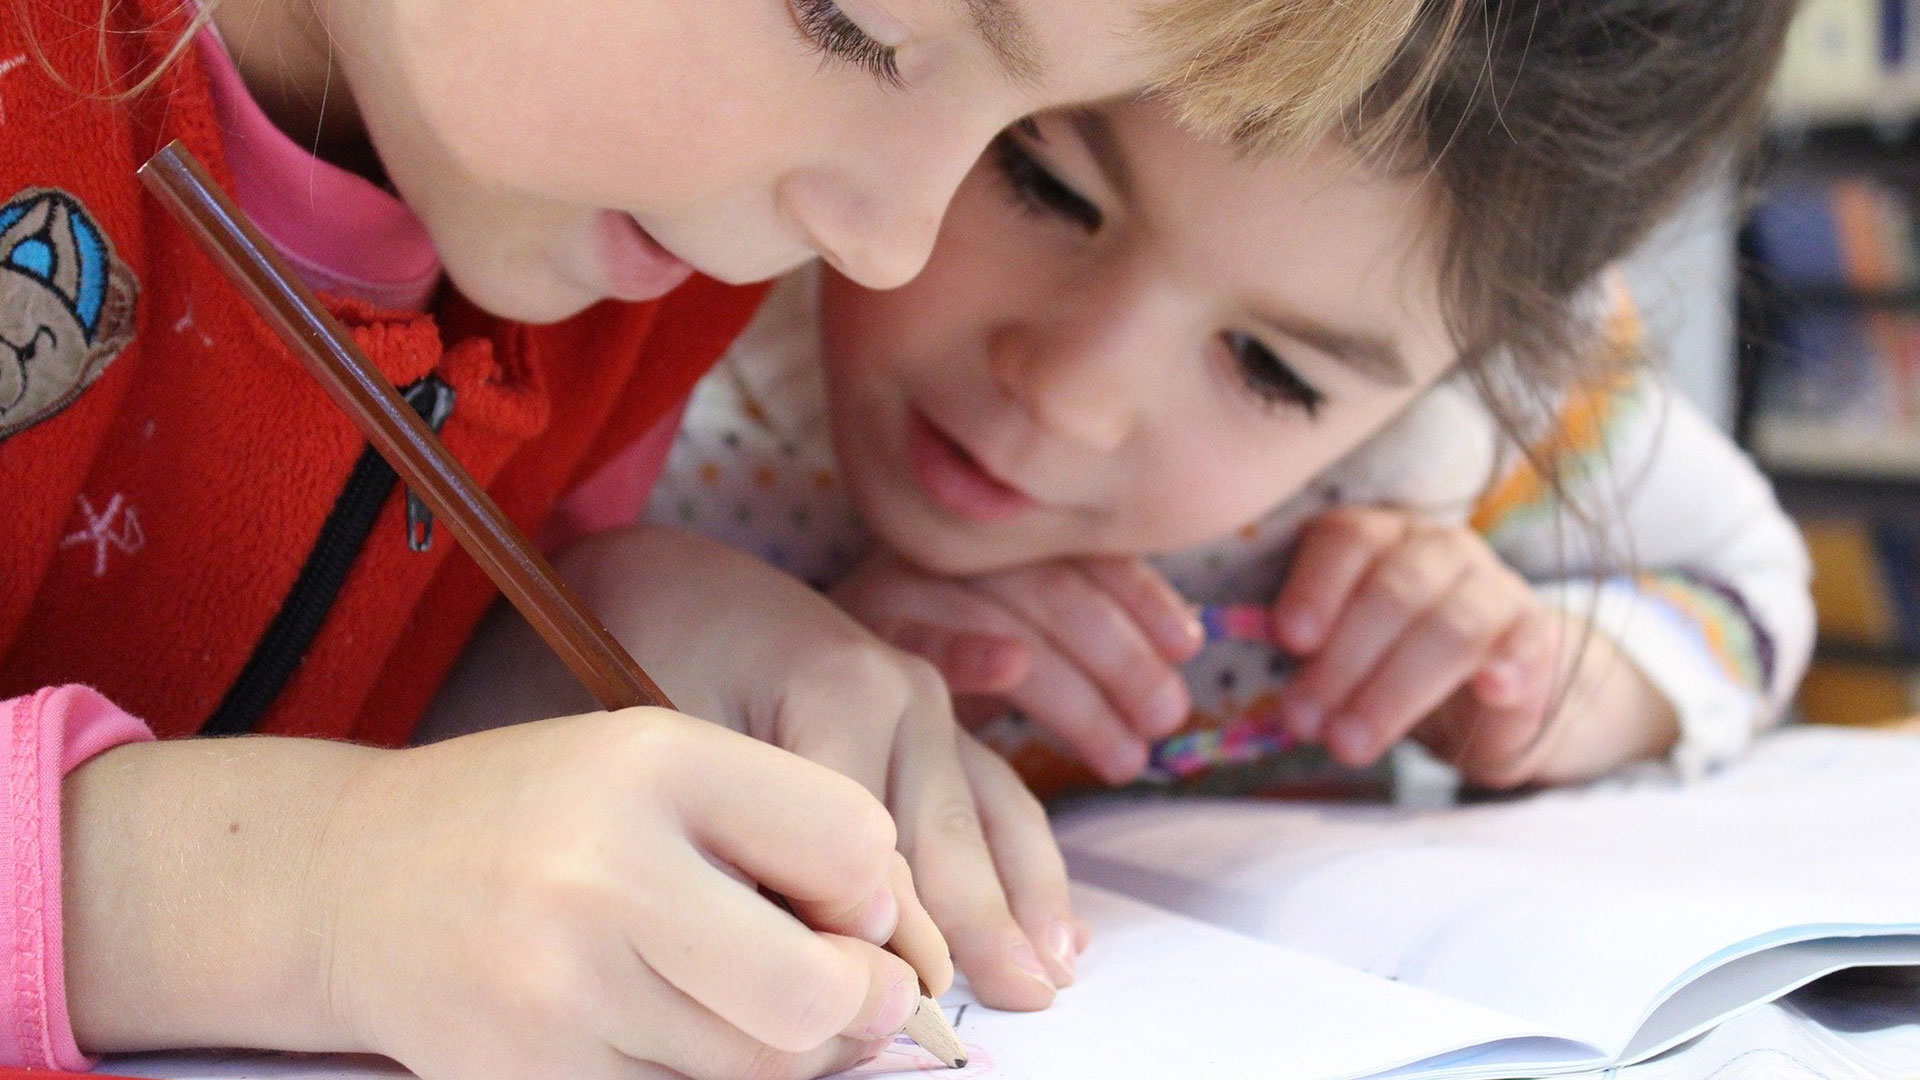 Young children looking closely at a piece of paper, one child holds a pencil and is writing on the paper